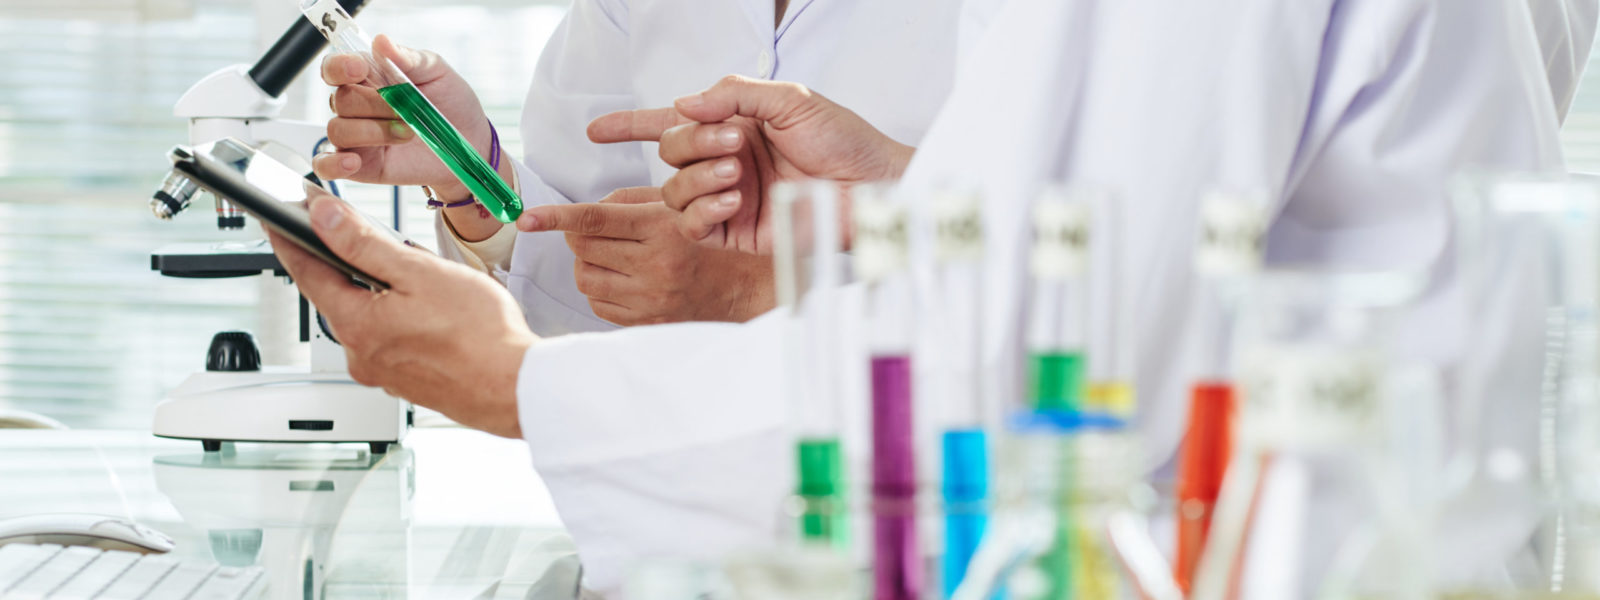 Close-up shot of unrecognizable chemists wearing white coats examining content of test tube and taking necessary notes with help of digital tablet while carrying out experiment